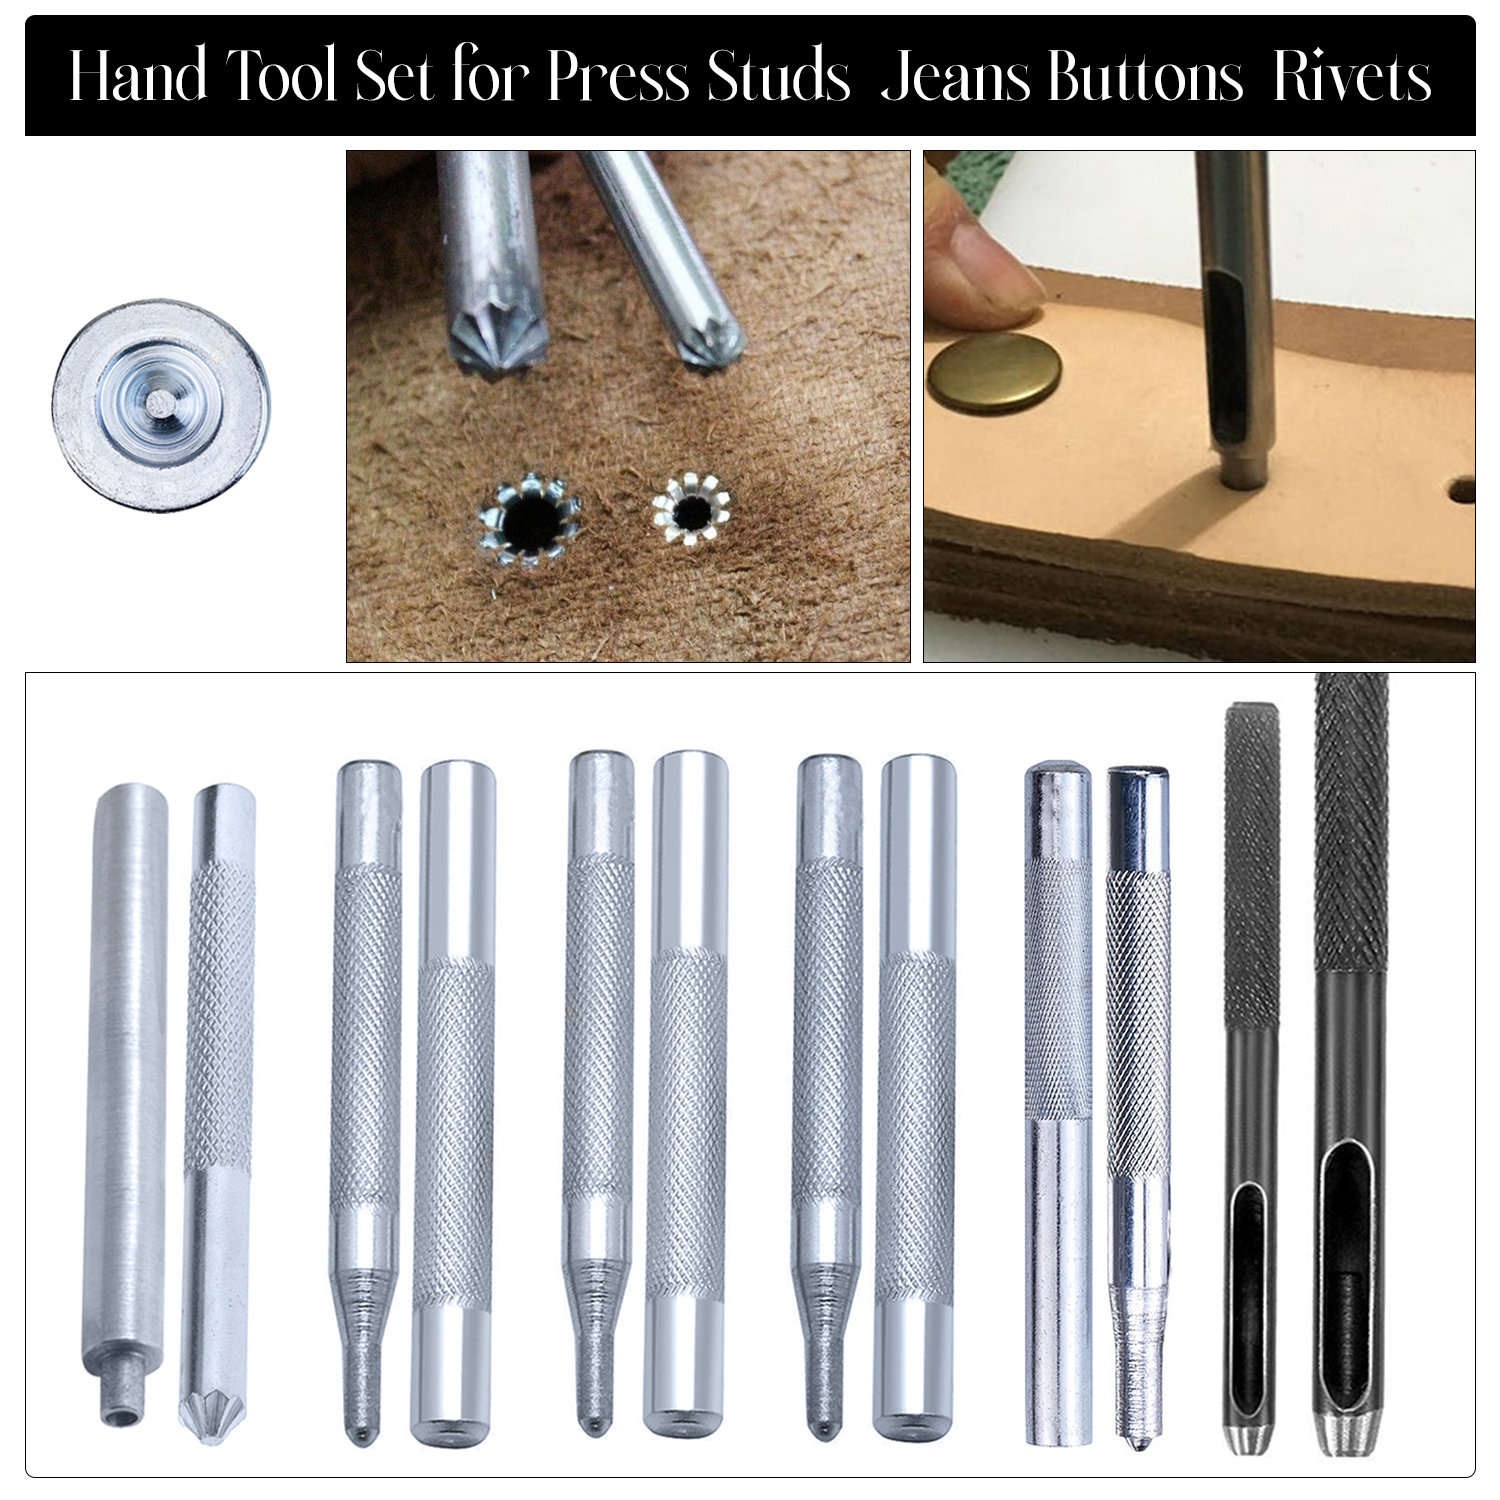 Rivet Setter Hole Punch Set Round Die Base Silver Hand Tool Leather Tool  11pcs Set 2.5mm 201 45# Steel 633 655 - AliExpress